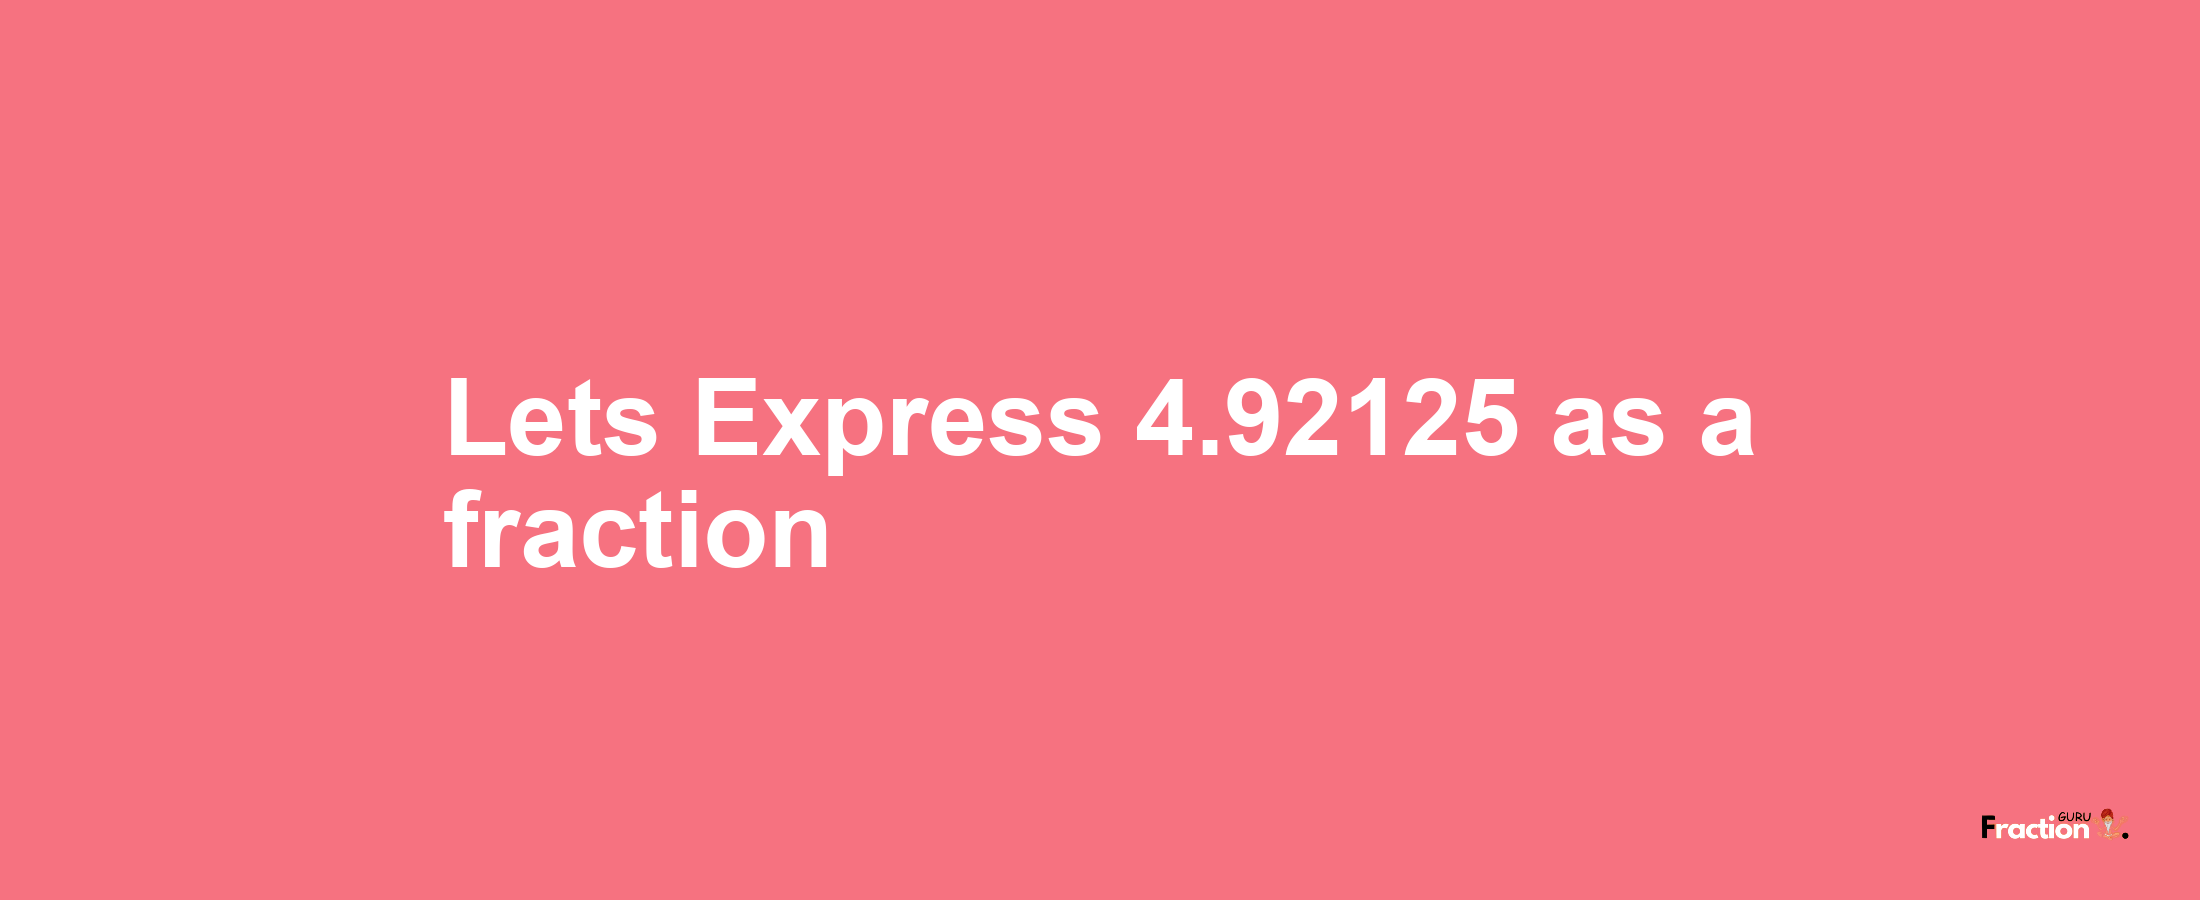 Lets Express 4.92125 as afraction